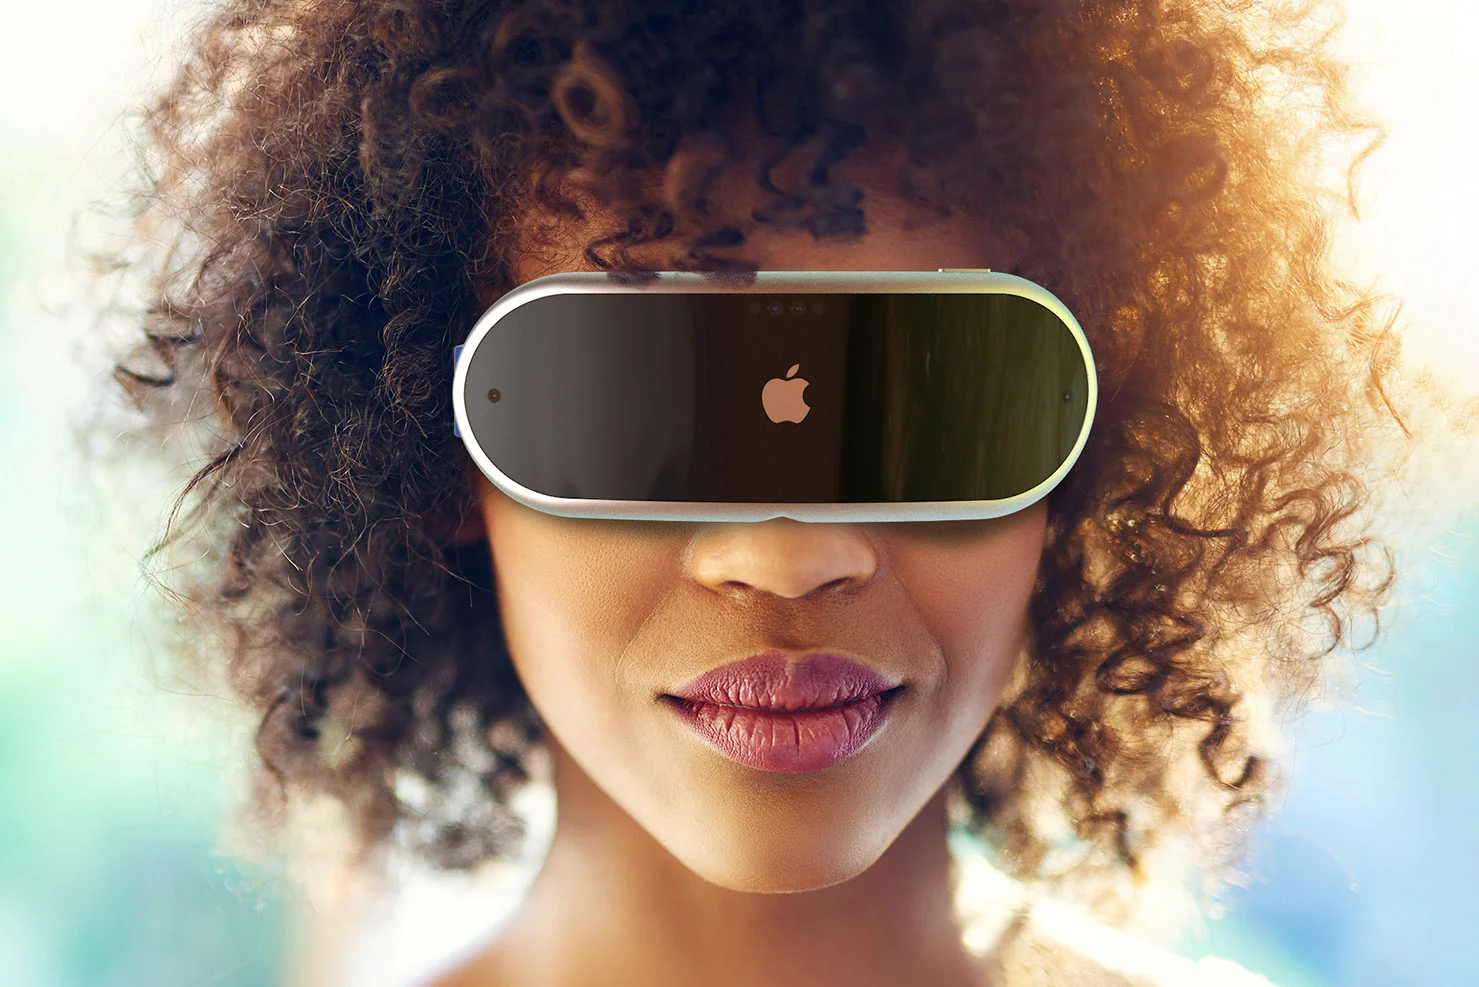 www digitaltrends com apple vr headset concept feature antonio de rosa - 5 most exciting Apple products to Look Forward to in 2023